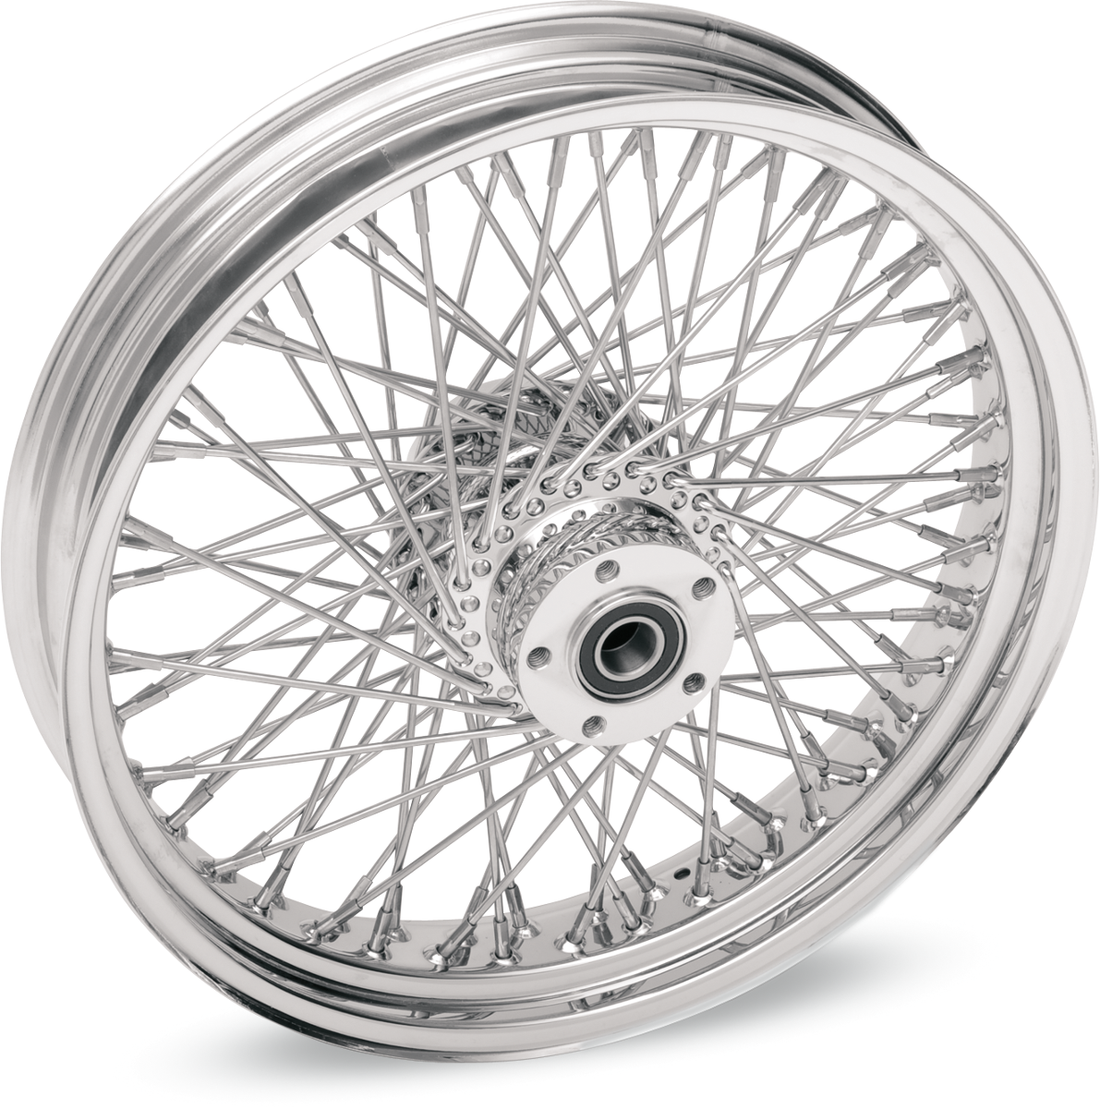 DRAG SPECIALTIES Front Wheel -  80 Spoke - Single Disc/No ABS - Chrome - 21"x2.15" - '00-'06 FXSTS 04228-1750S